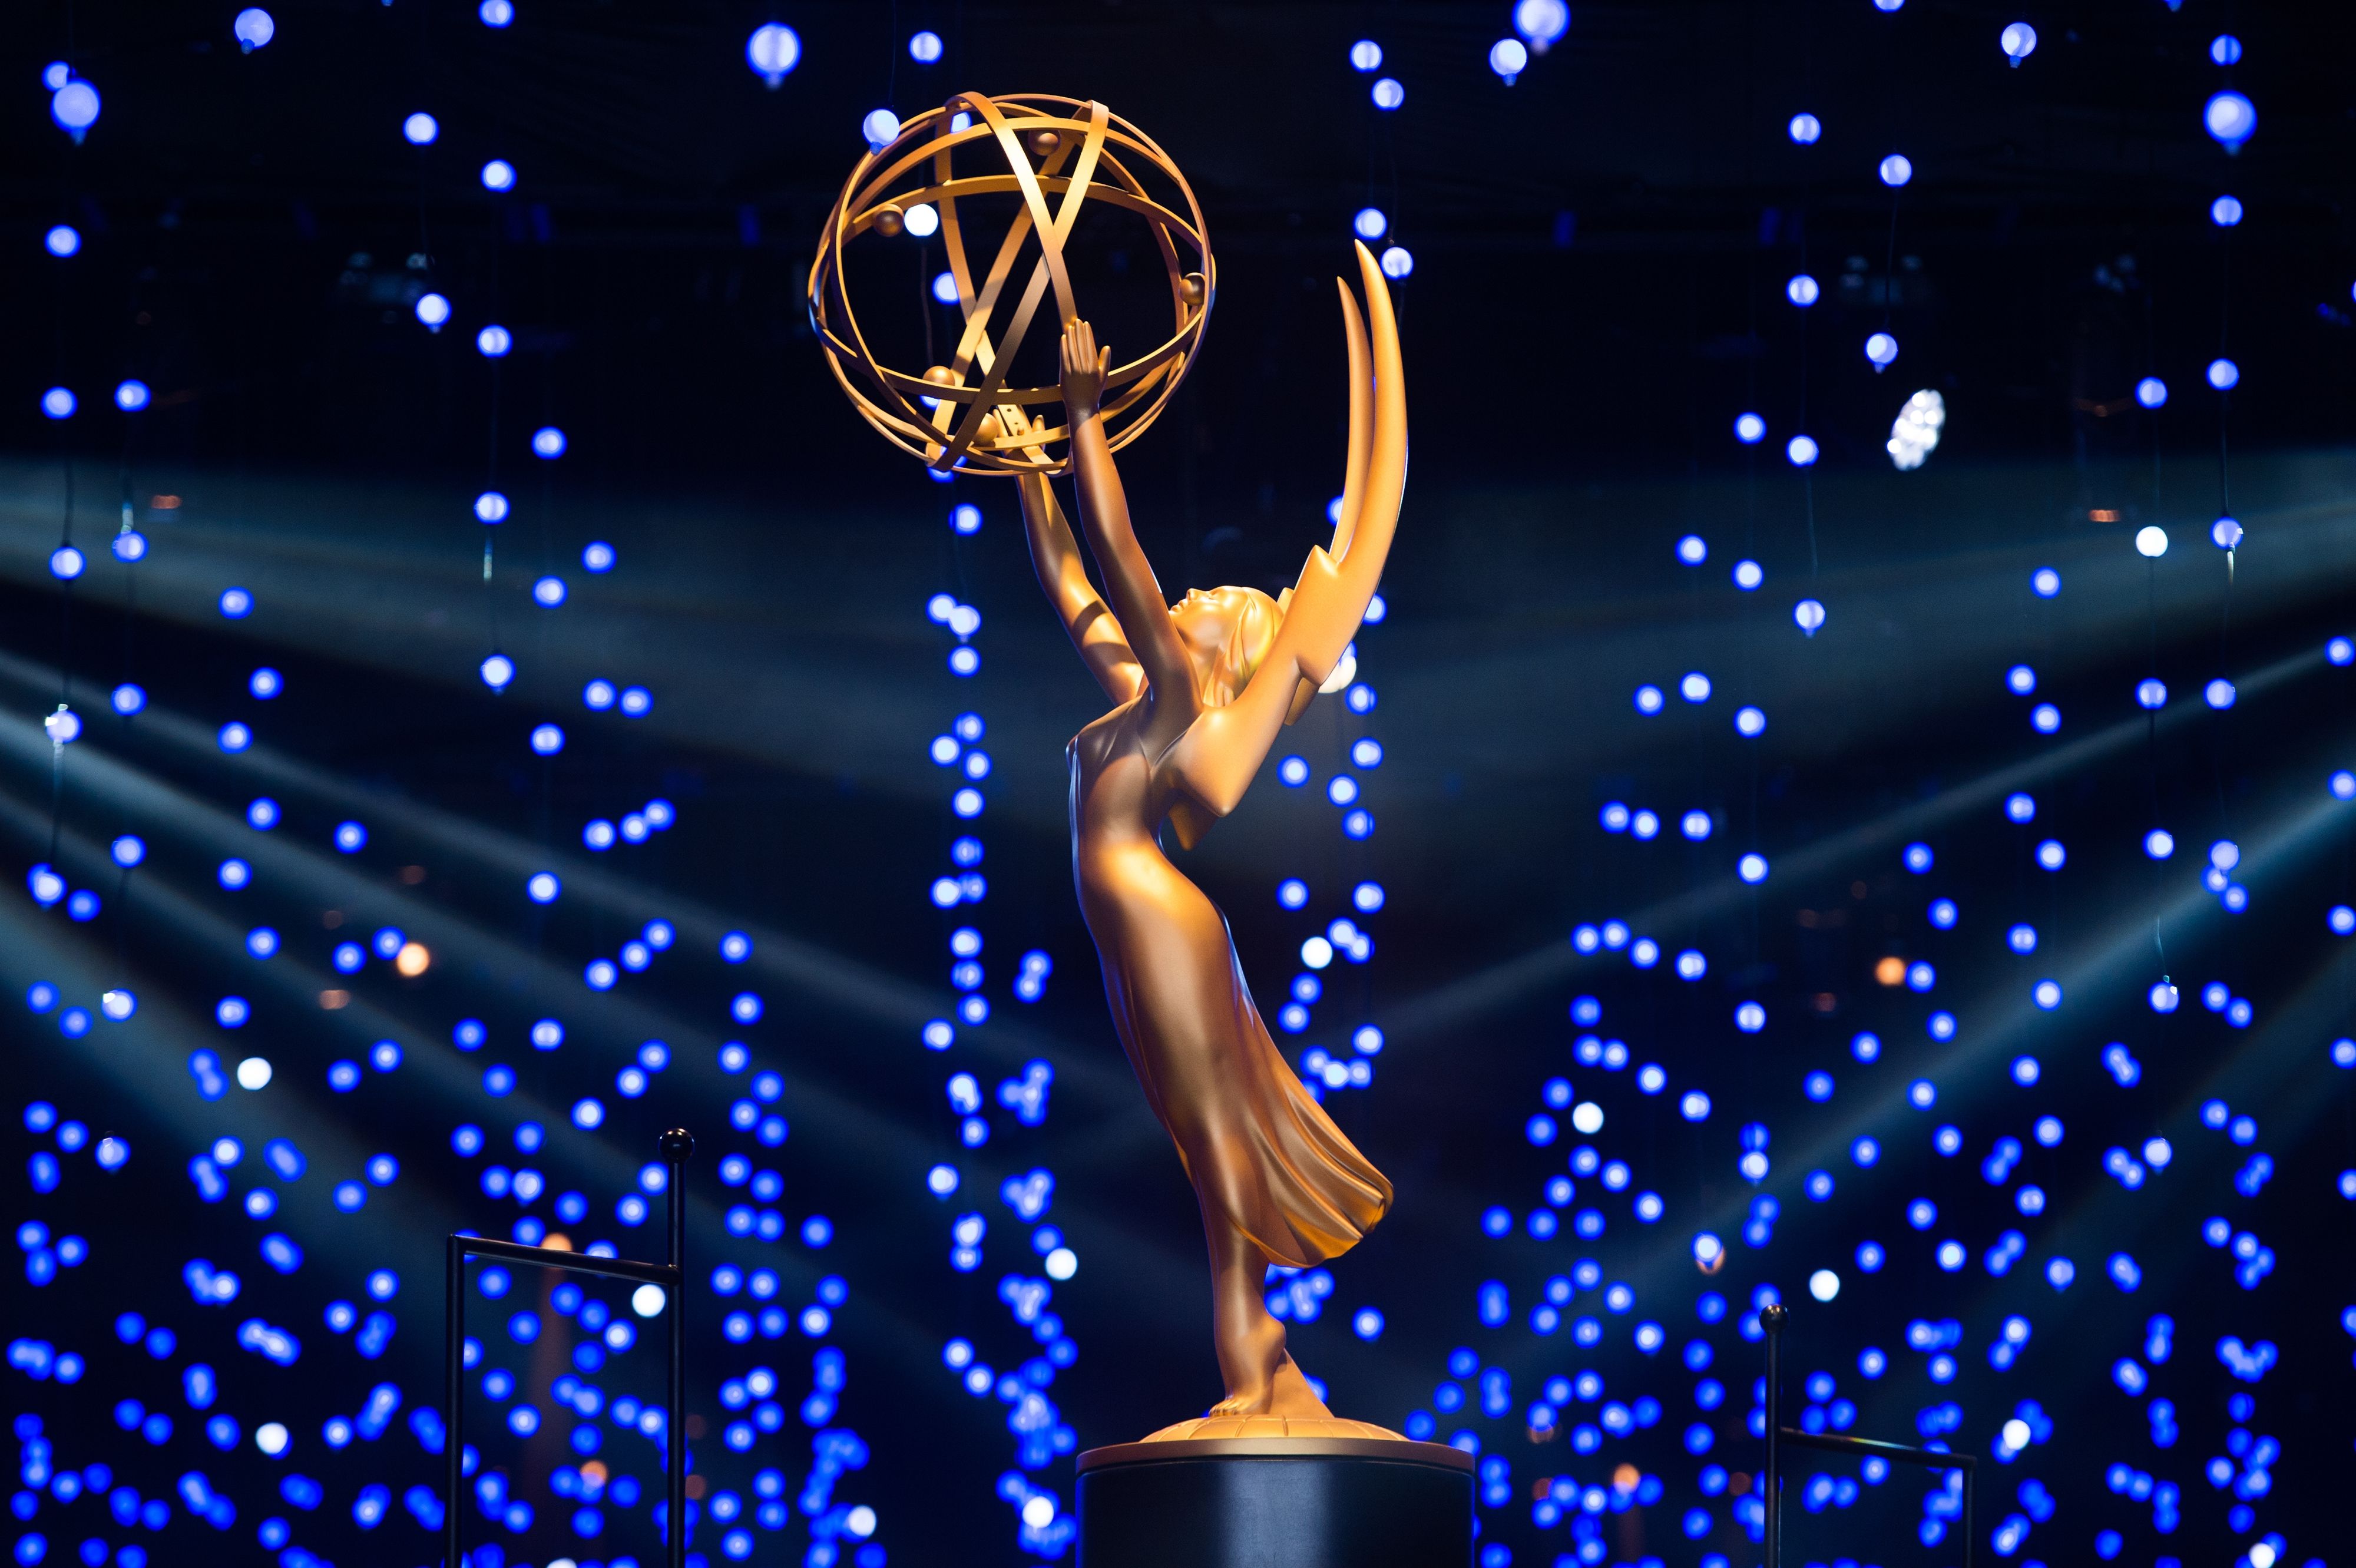 A gold Emmy statuette. The award looks like a woman in a dress with wings holding up a gold ball.